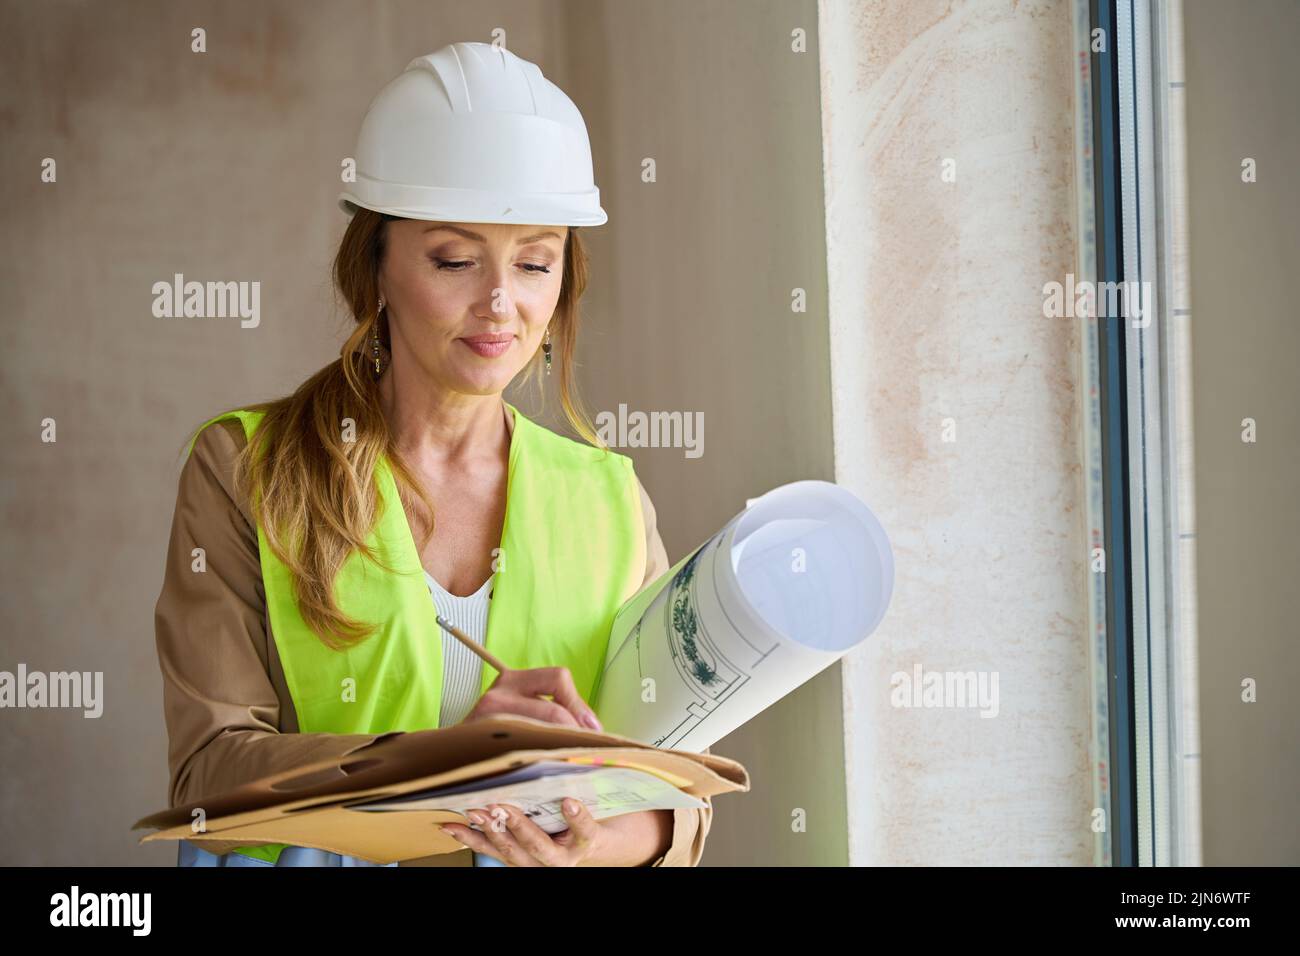 Portrait of pensive woman realtor with folders and projects Stock Photo